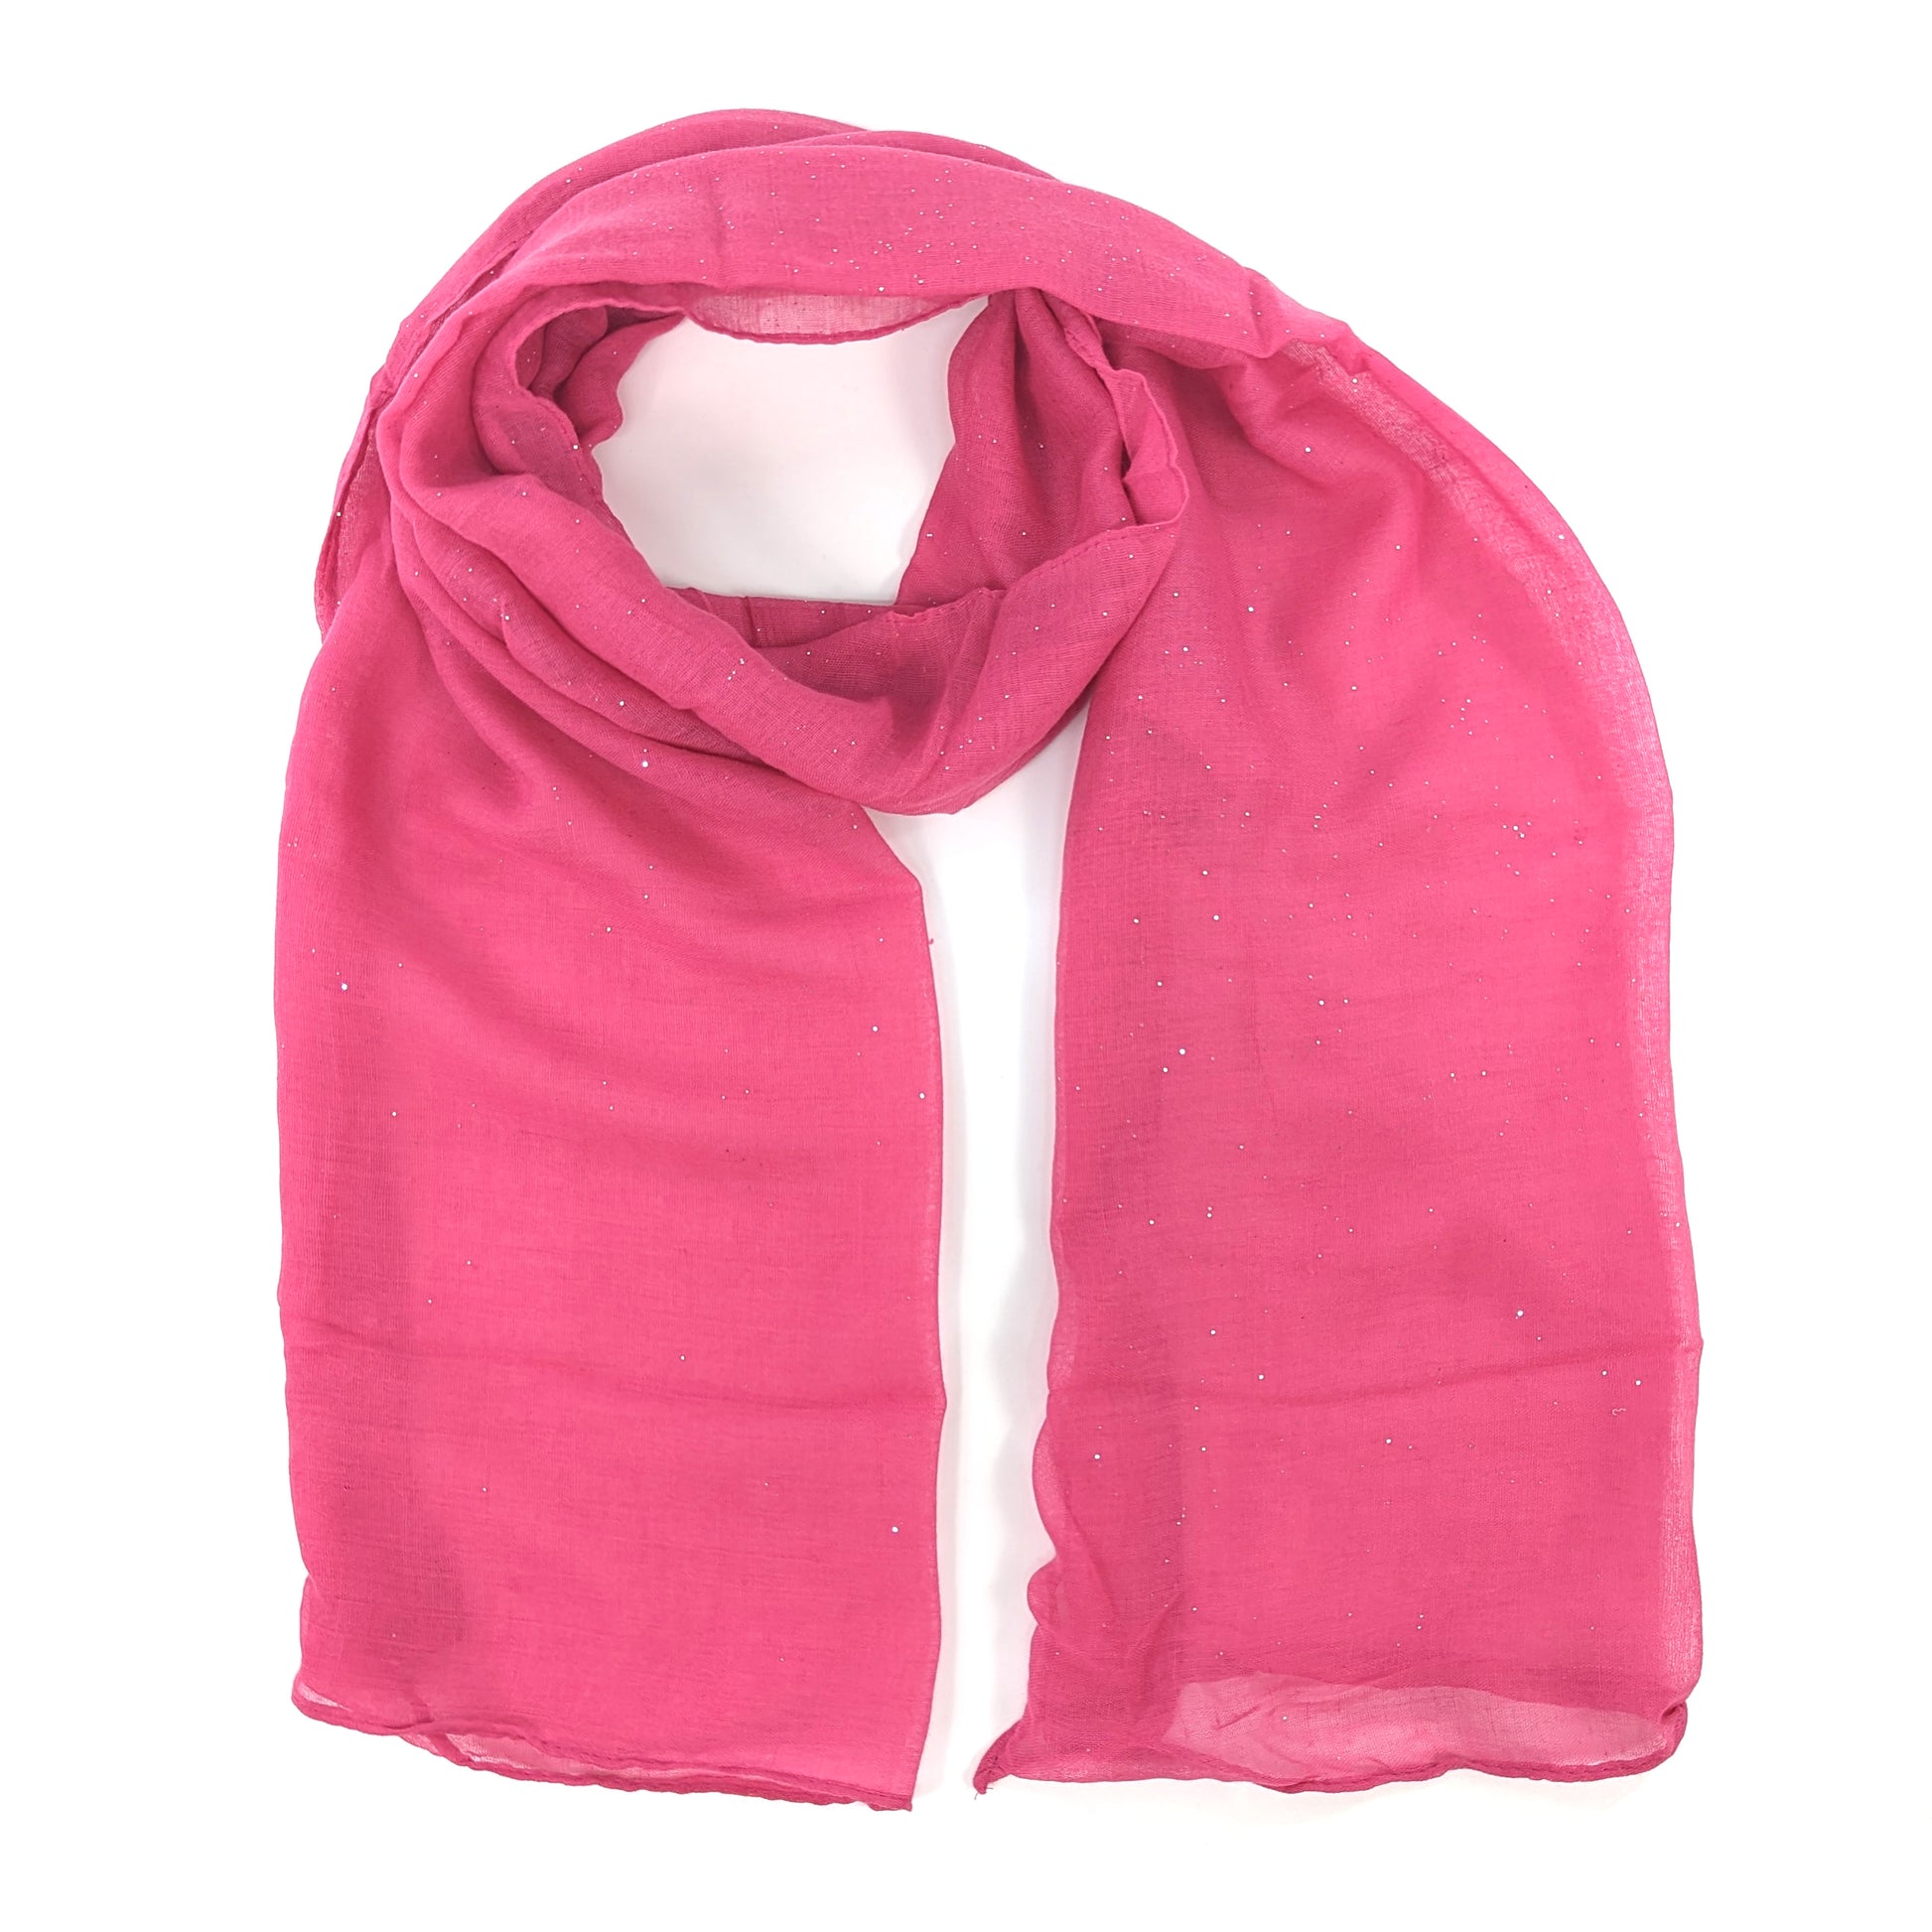 Image shows a lightweigh bright pink scarf with subtle silver sparkle throughtout